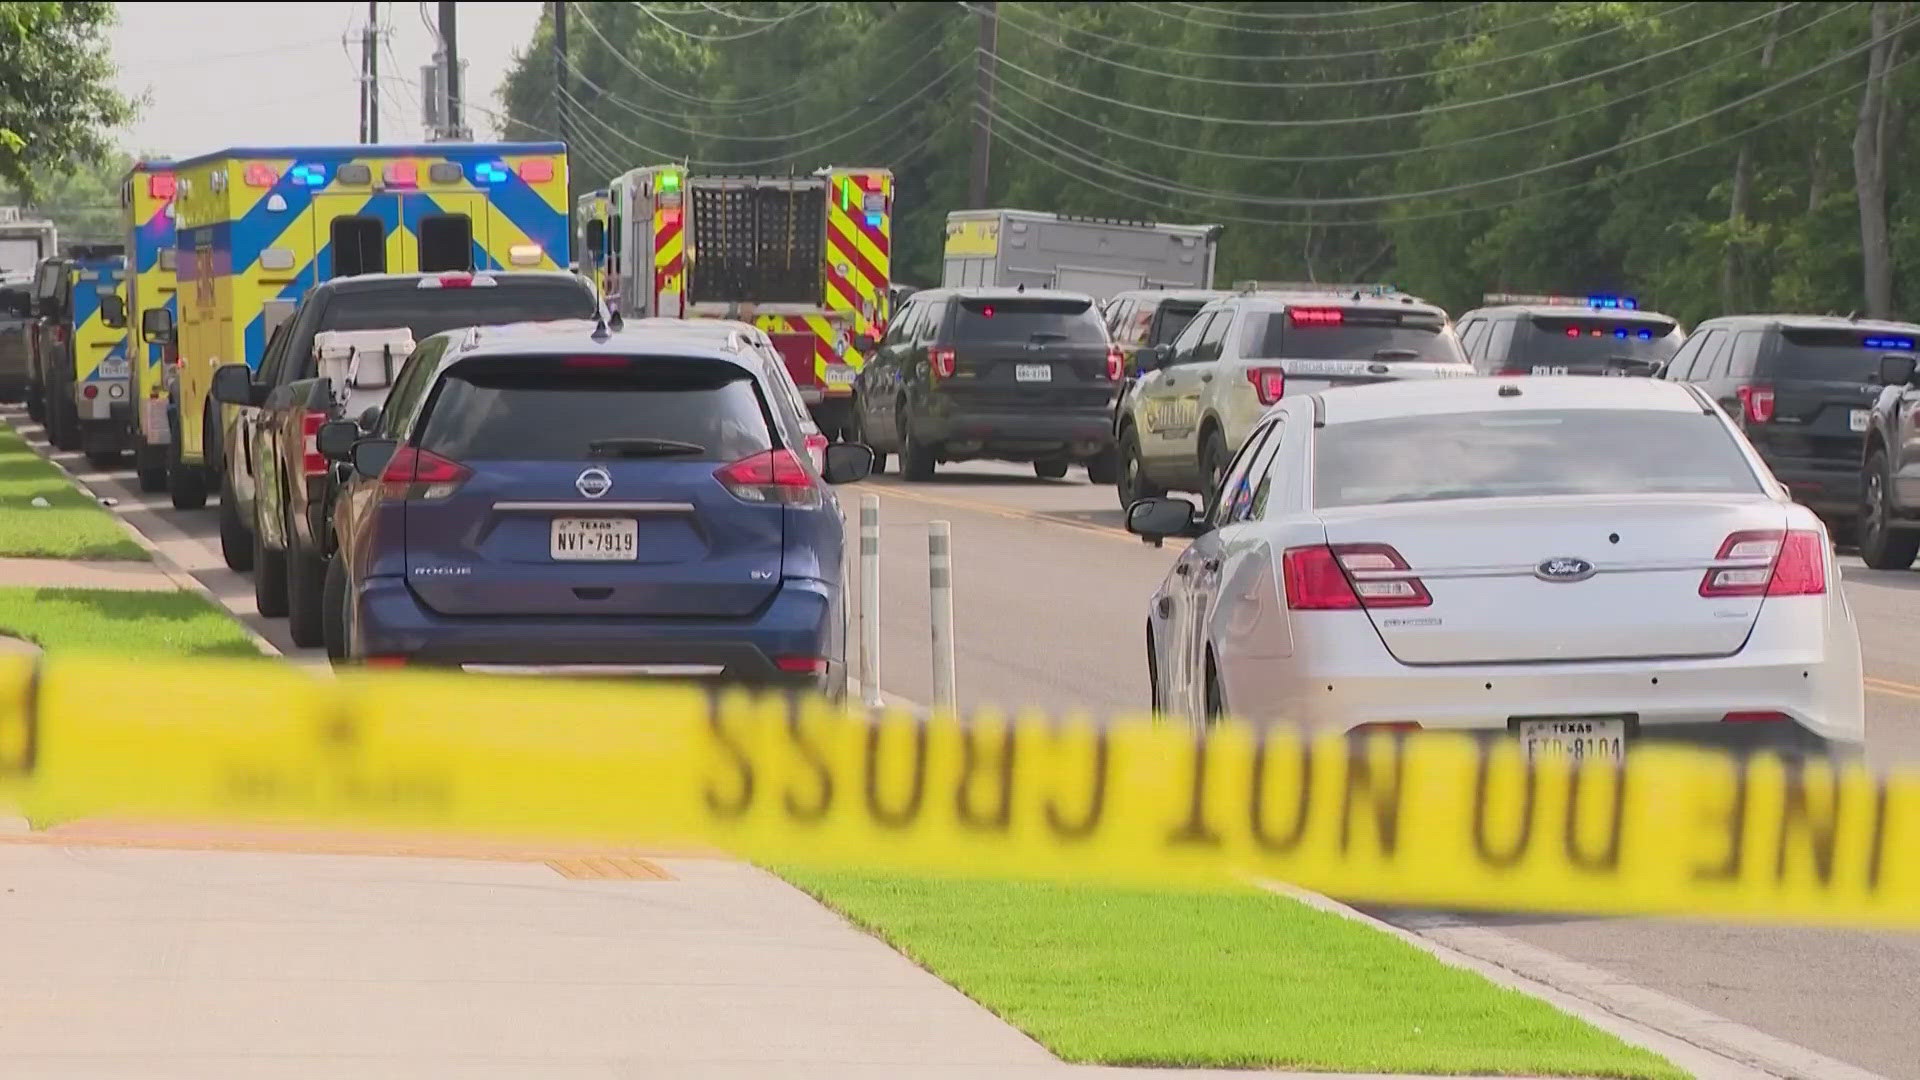 Austin police say officers shot and killed a suspect after a standoff at a convenience store.